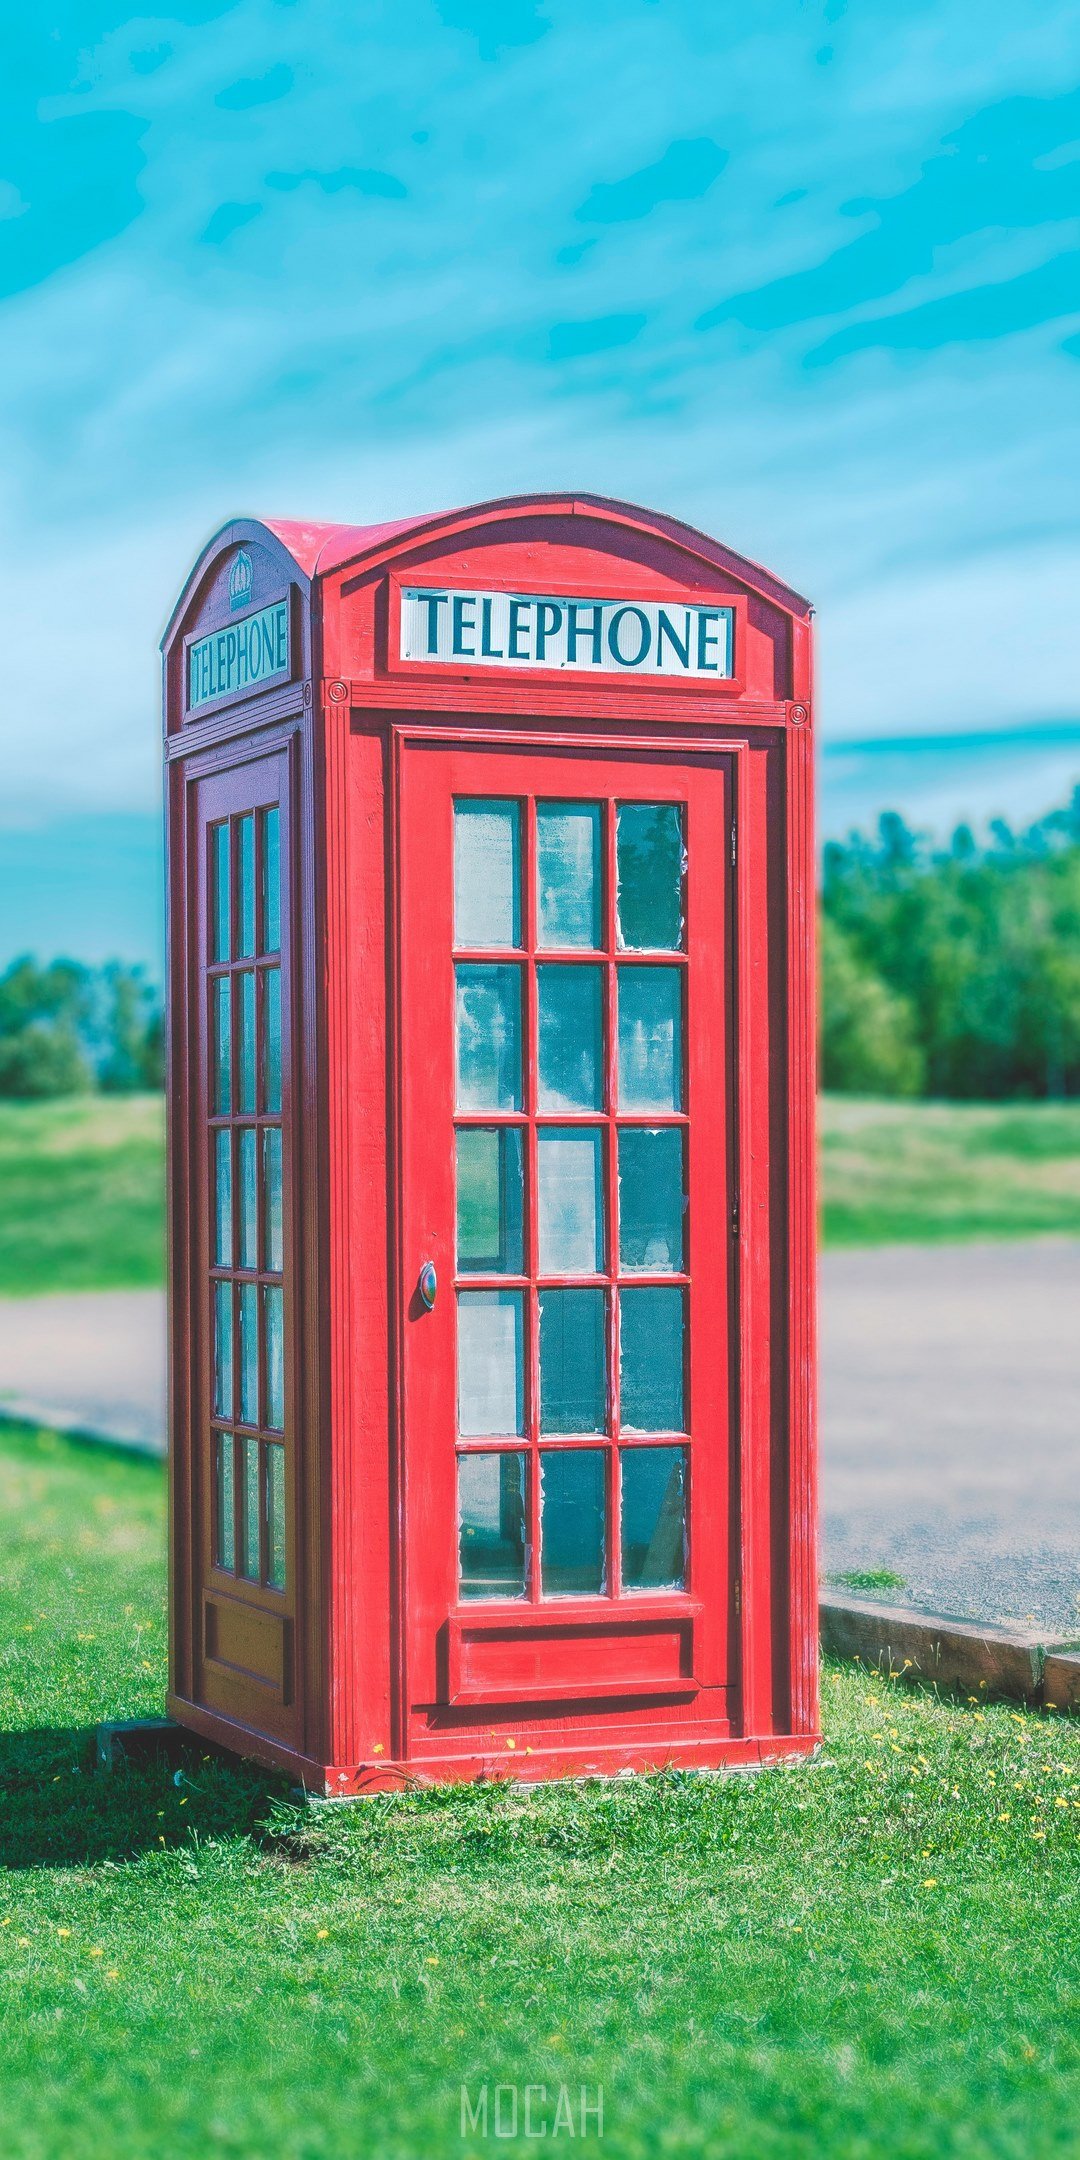 a red telephone booth sits on green grass against a blue sky, telephone booth in grass, Samsung Galaxy Note 10 Lite wallpaper hd, 1080x2400. Mocah HD Wallpaper